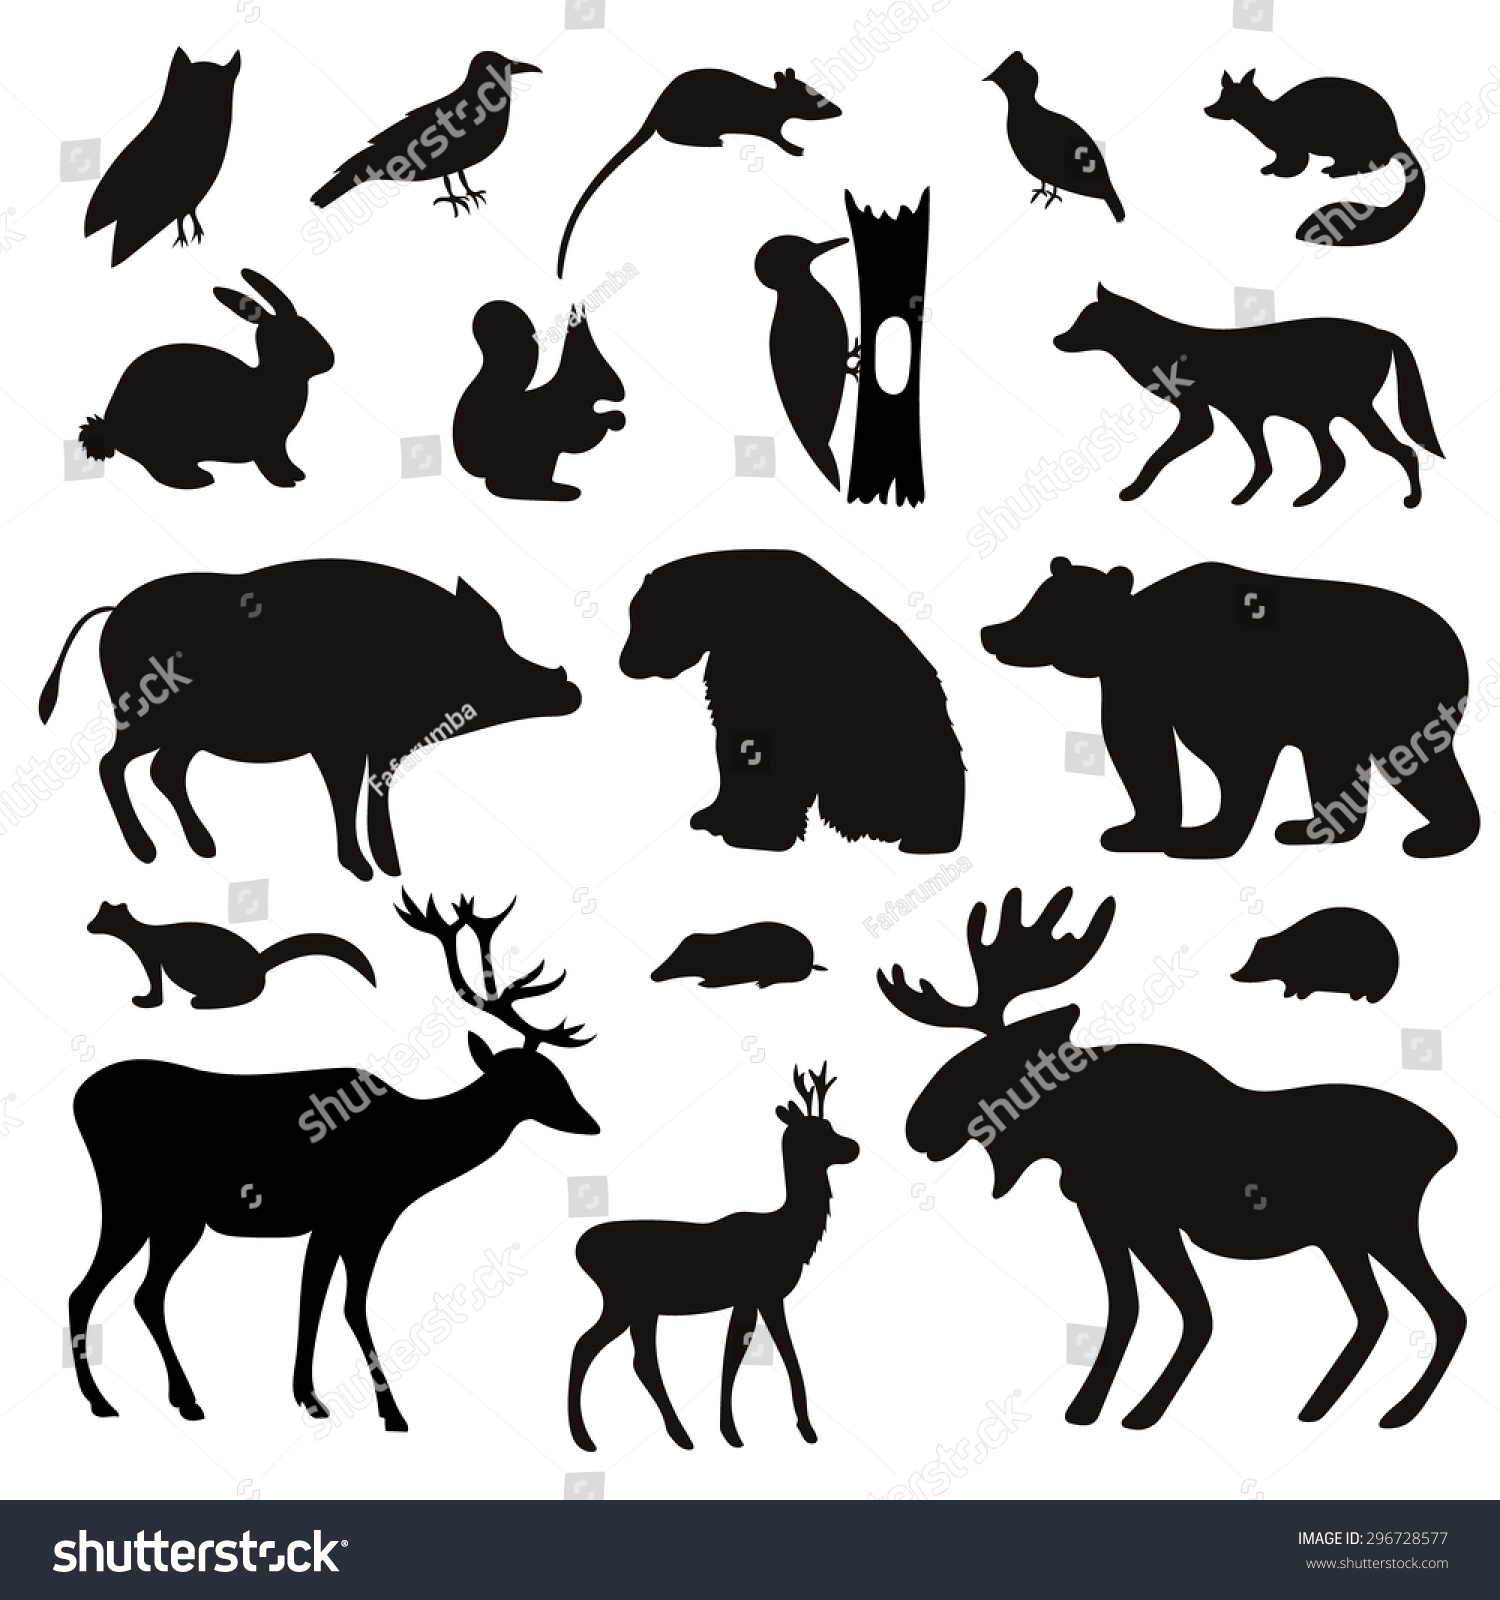 forest animals clipart black and white - photo #34